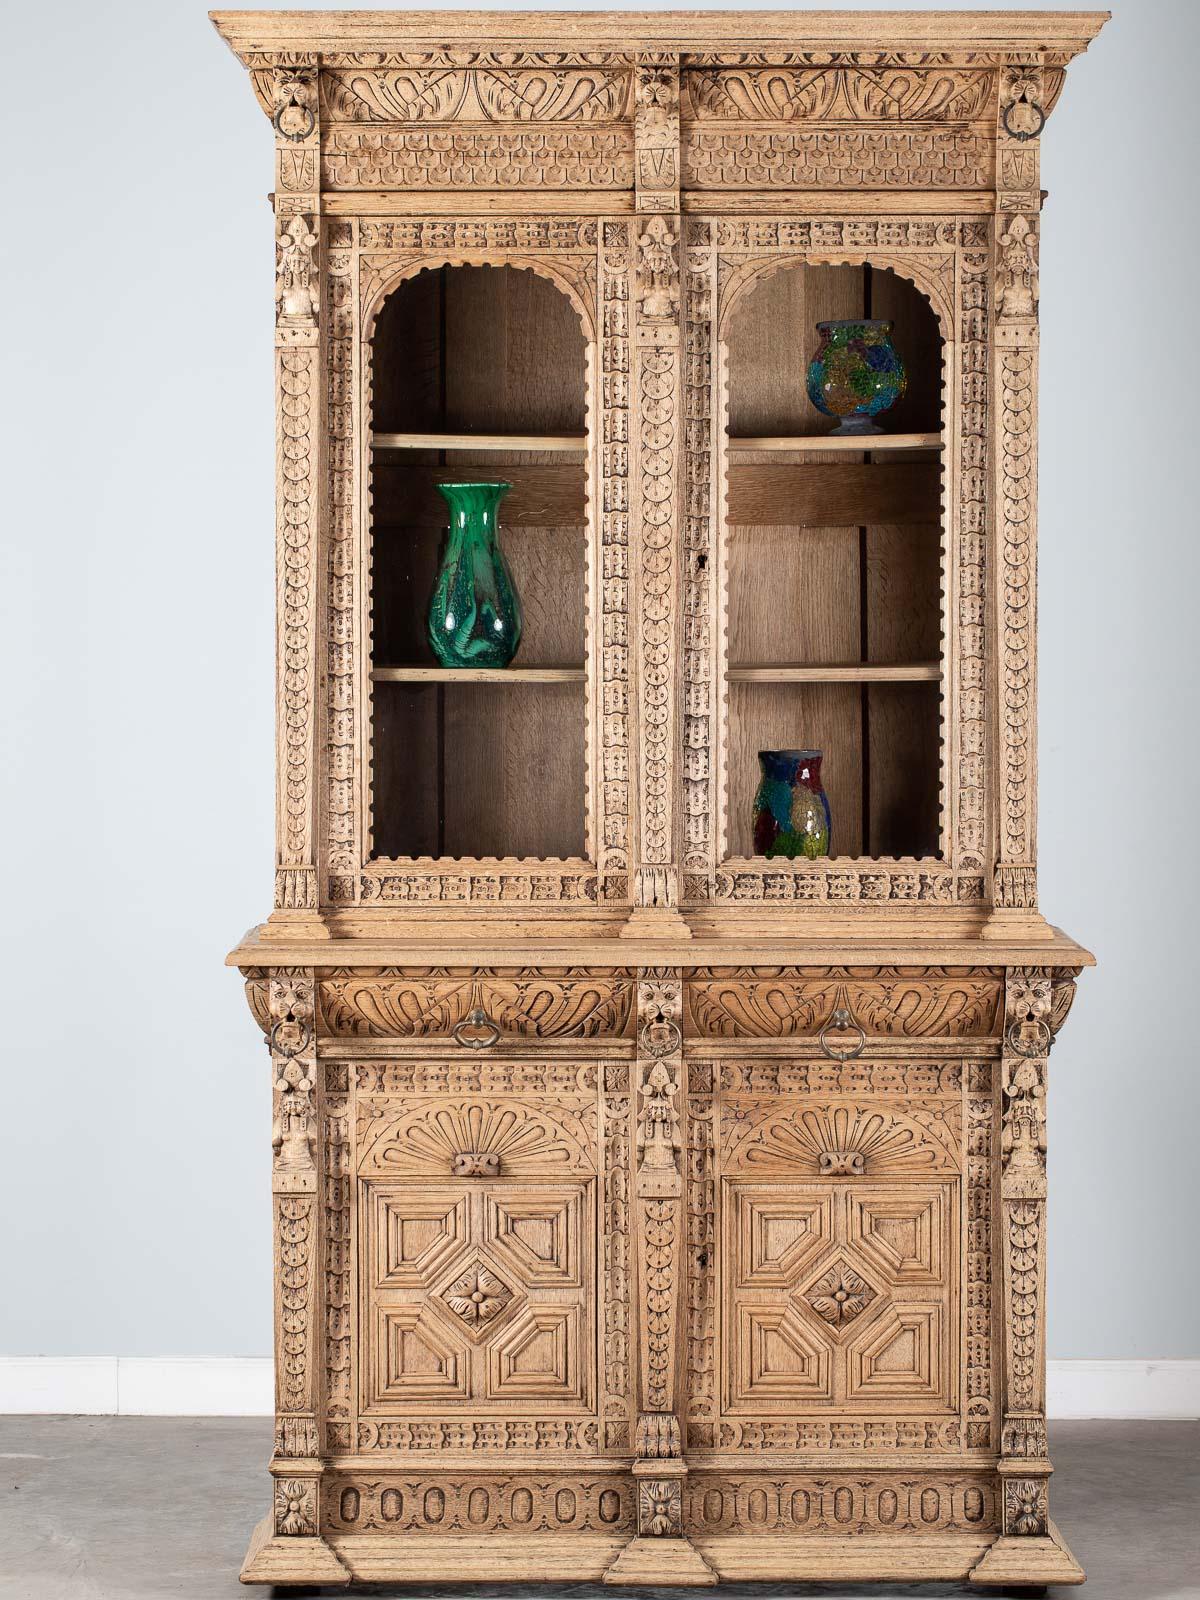 A handsome antique French Henri II style oak bibliotheque bookcase display cabinet circa 1880. Please take a moment to examine the lavish carving seen across the facade and sides of this bookcase and enlarge the photographs to see the details in